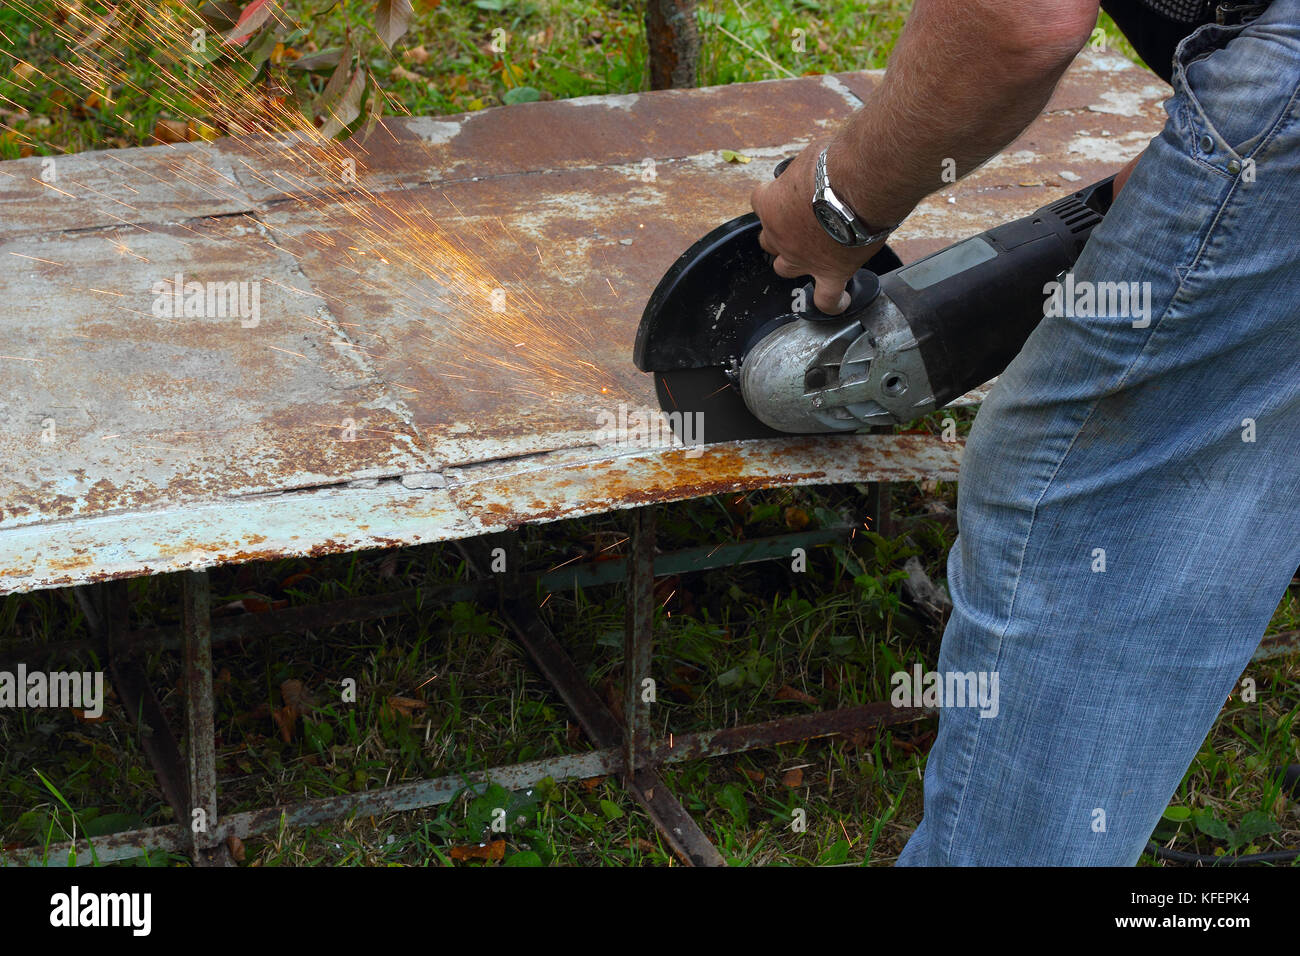 Worker cuts metal sheet by angle grinder photo Stock Photo